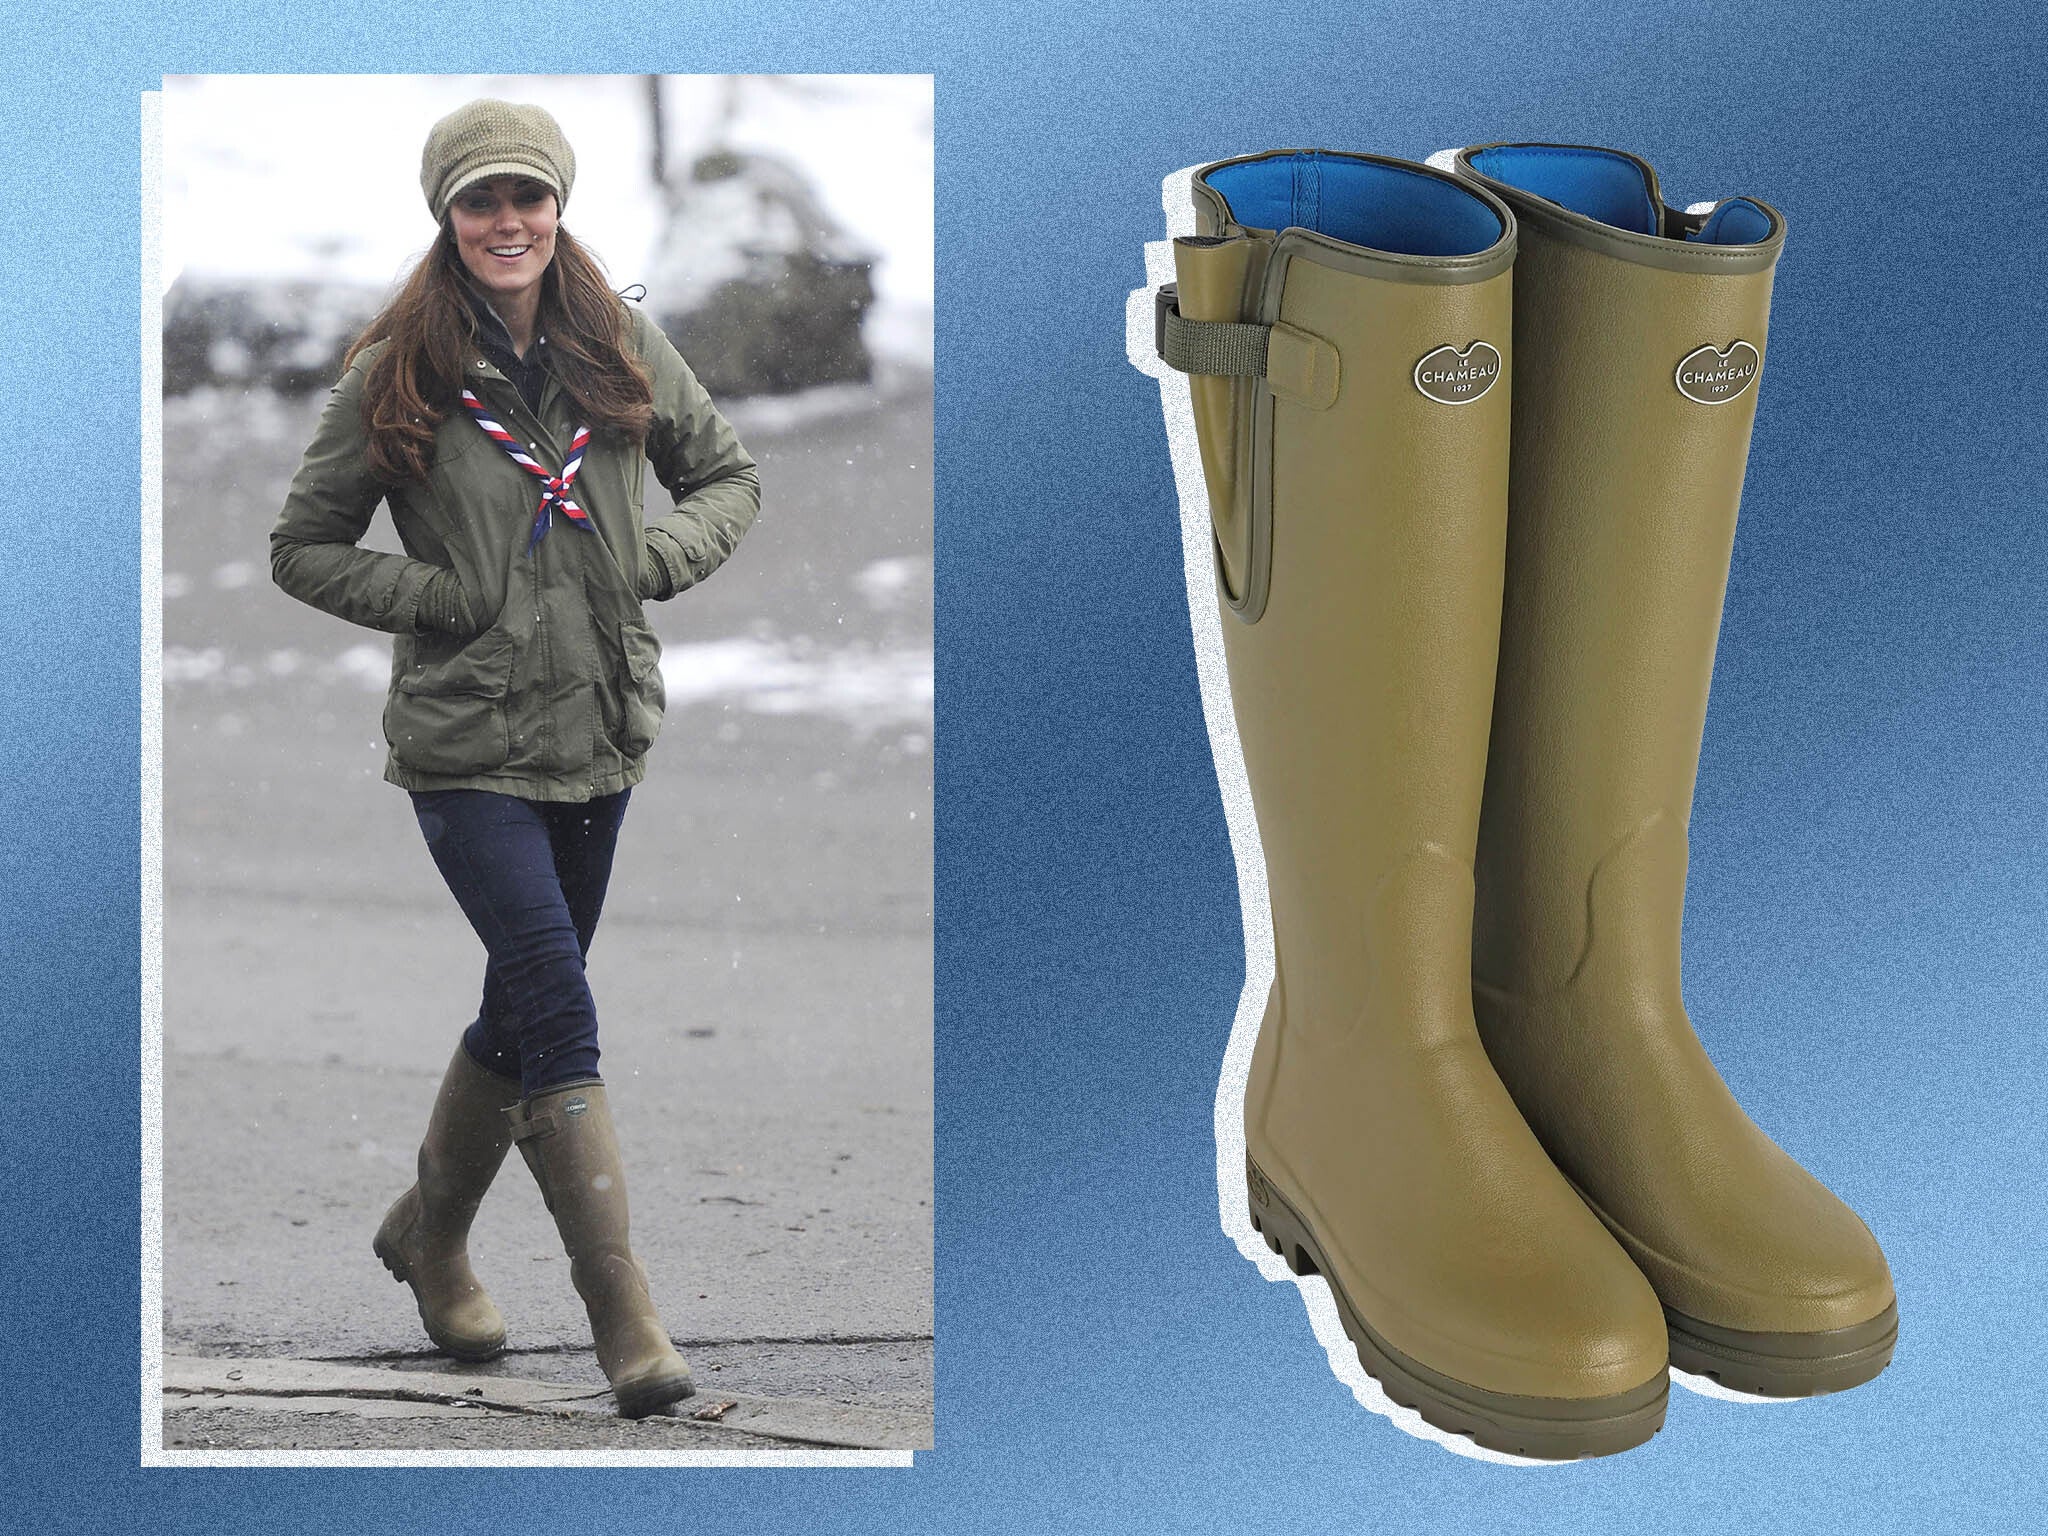 Le Chameau wellies review: favourite boots worth £200? The Independent